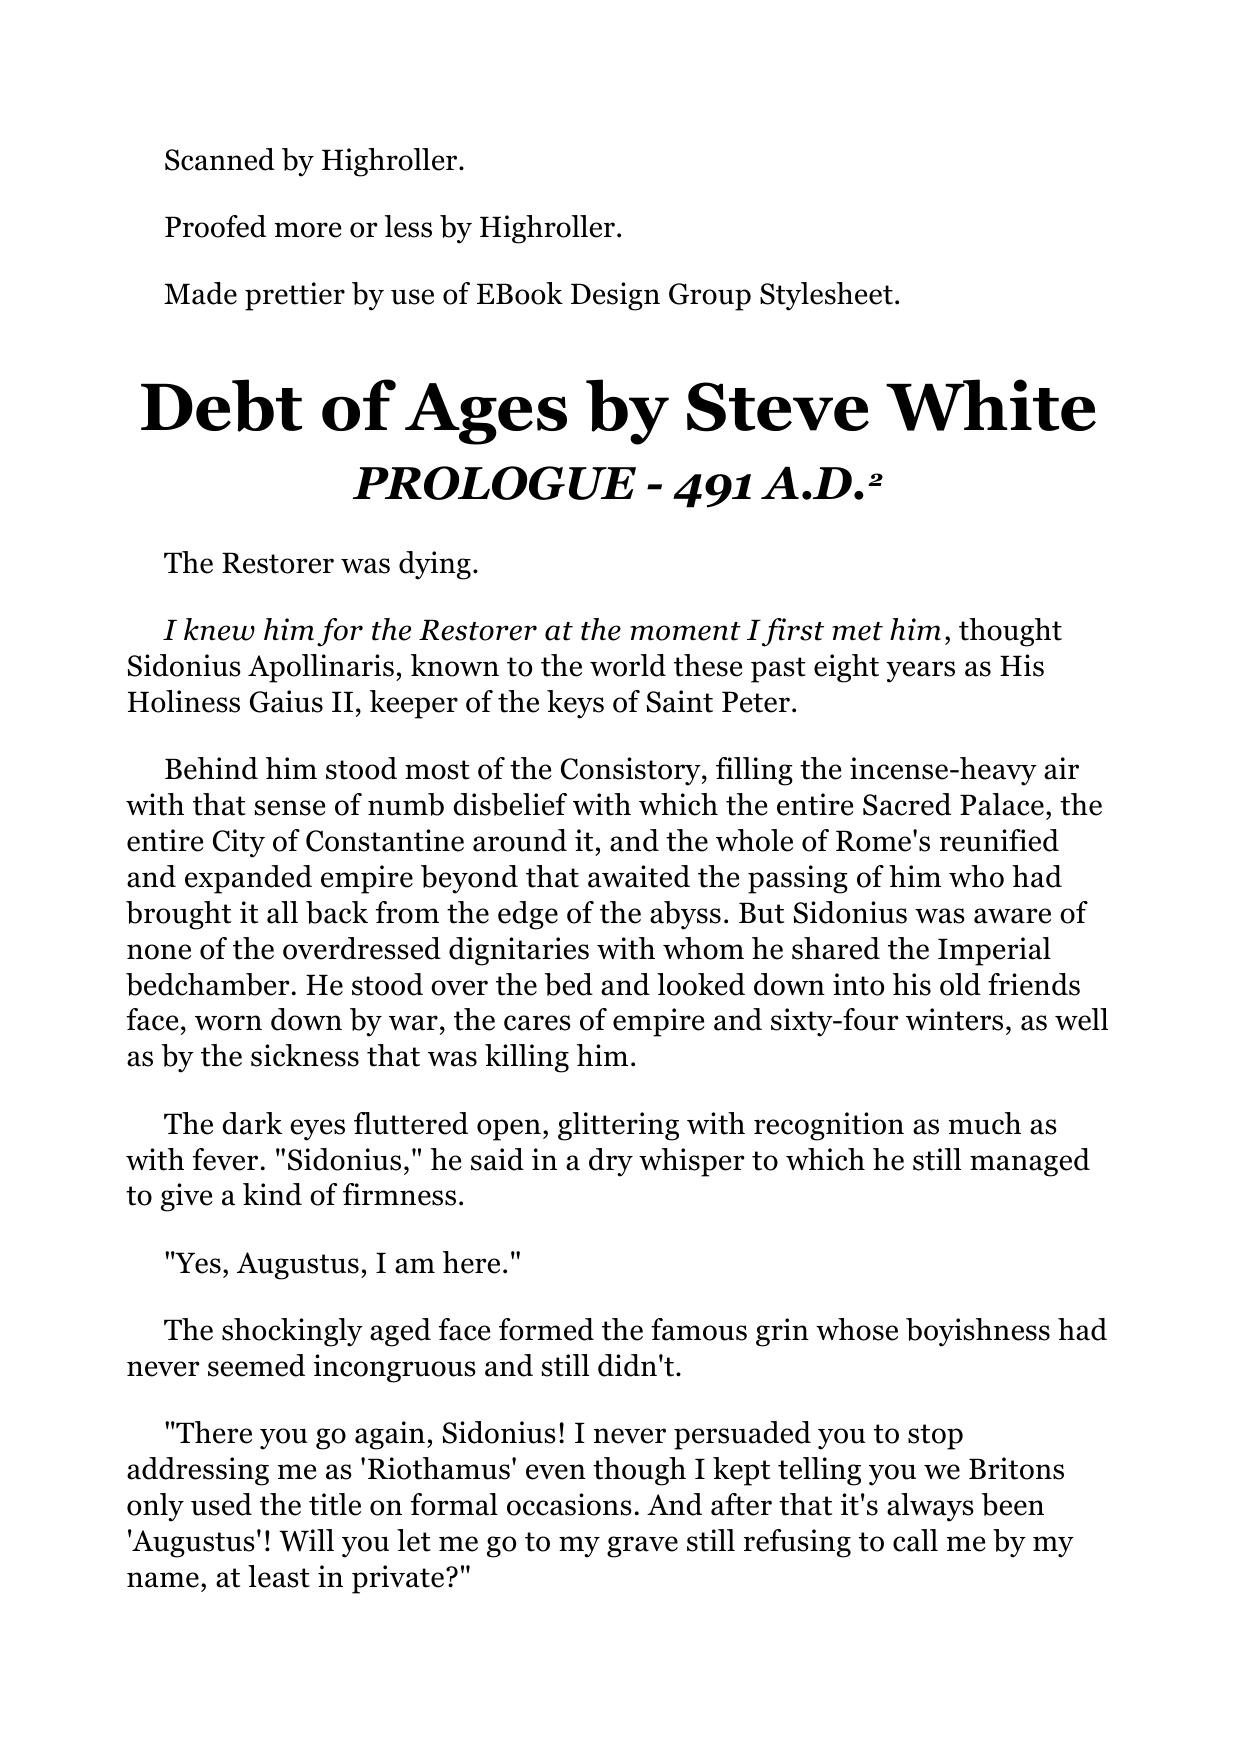 The Disinherited 3 - Debt of Ages